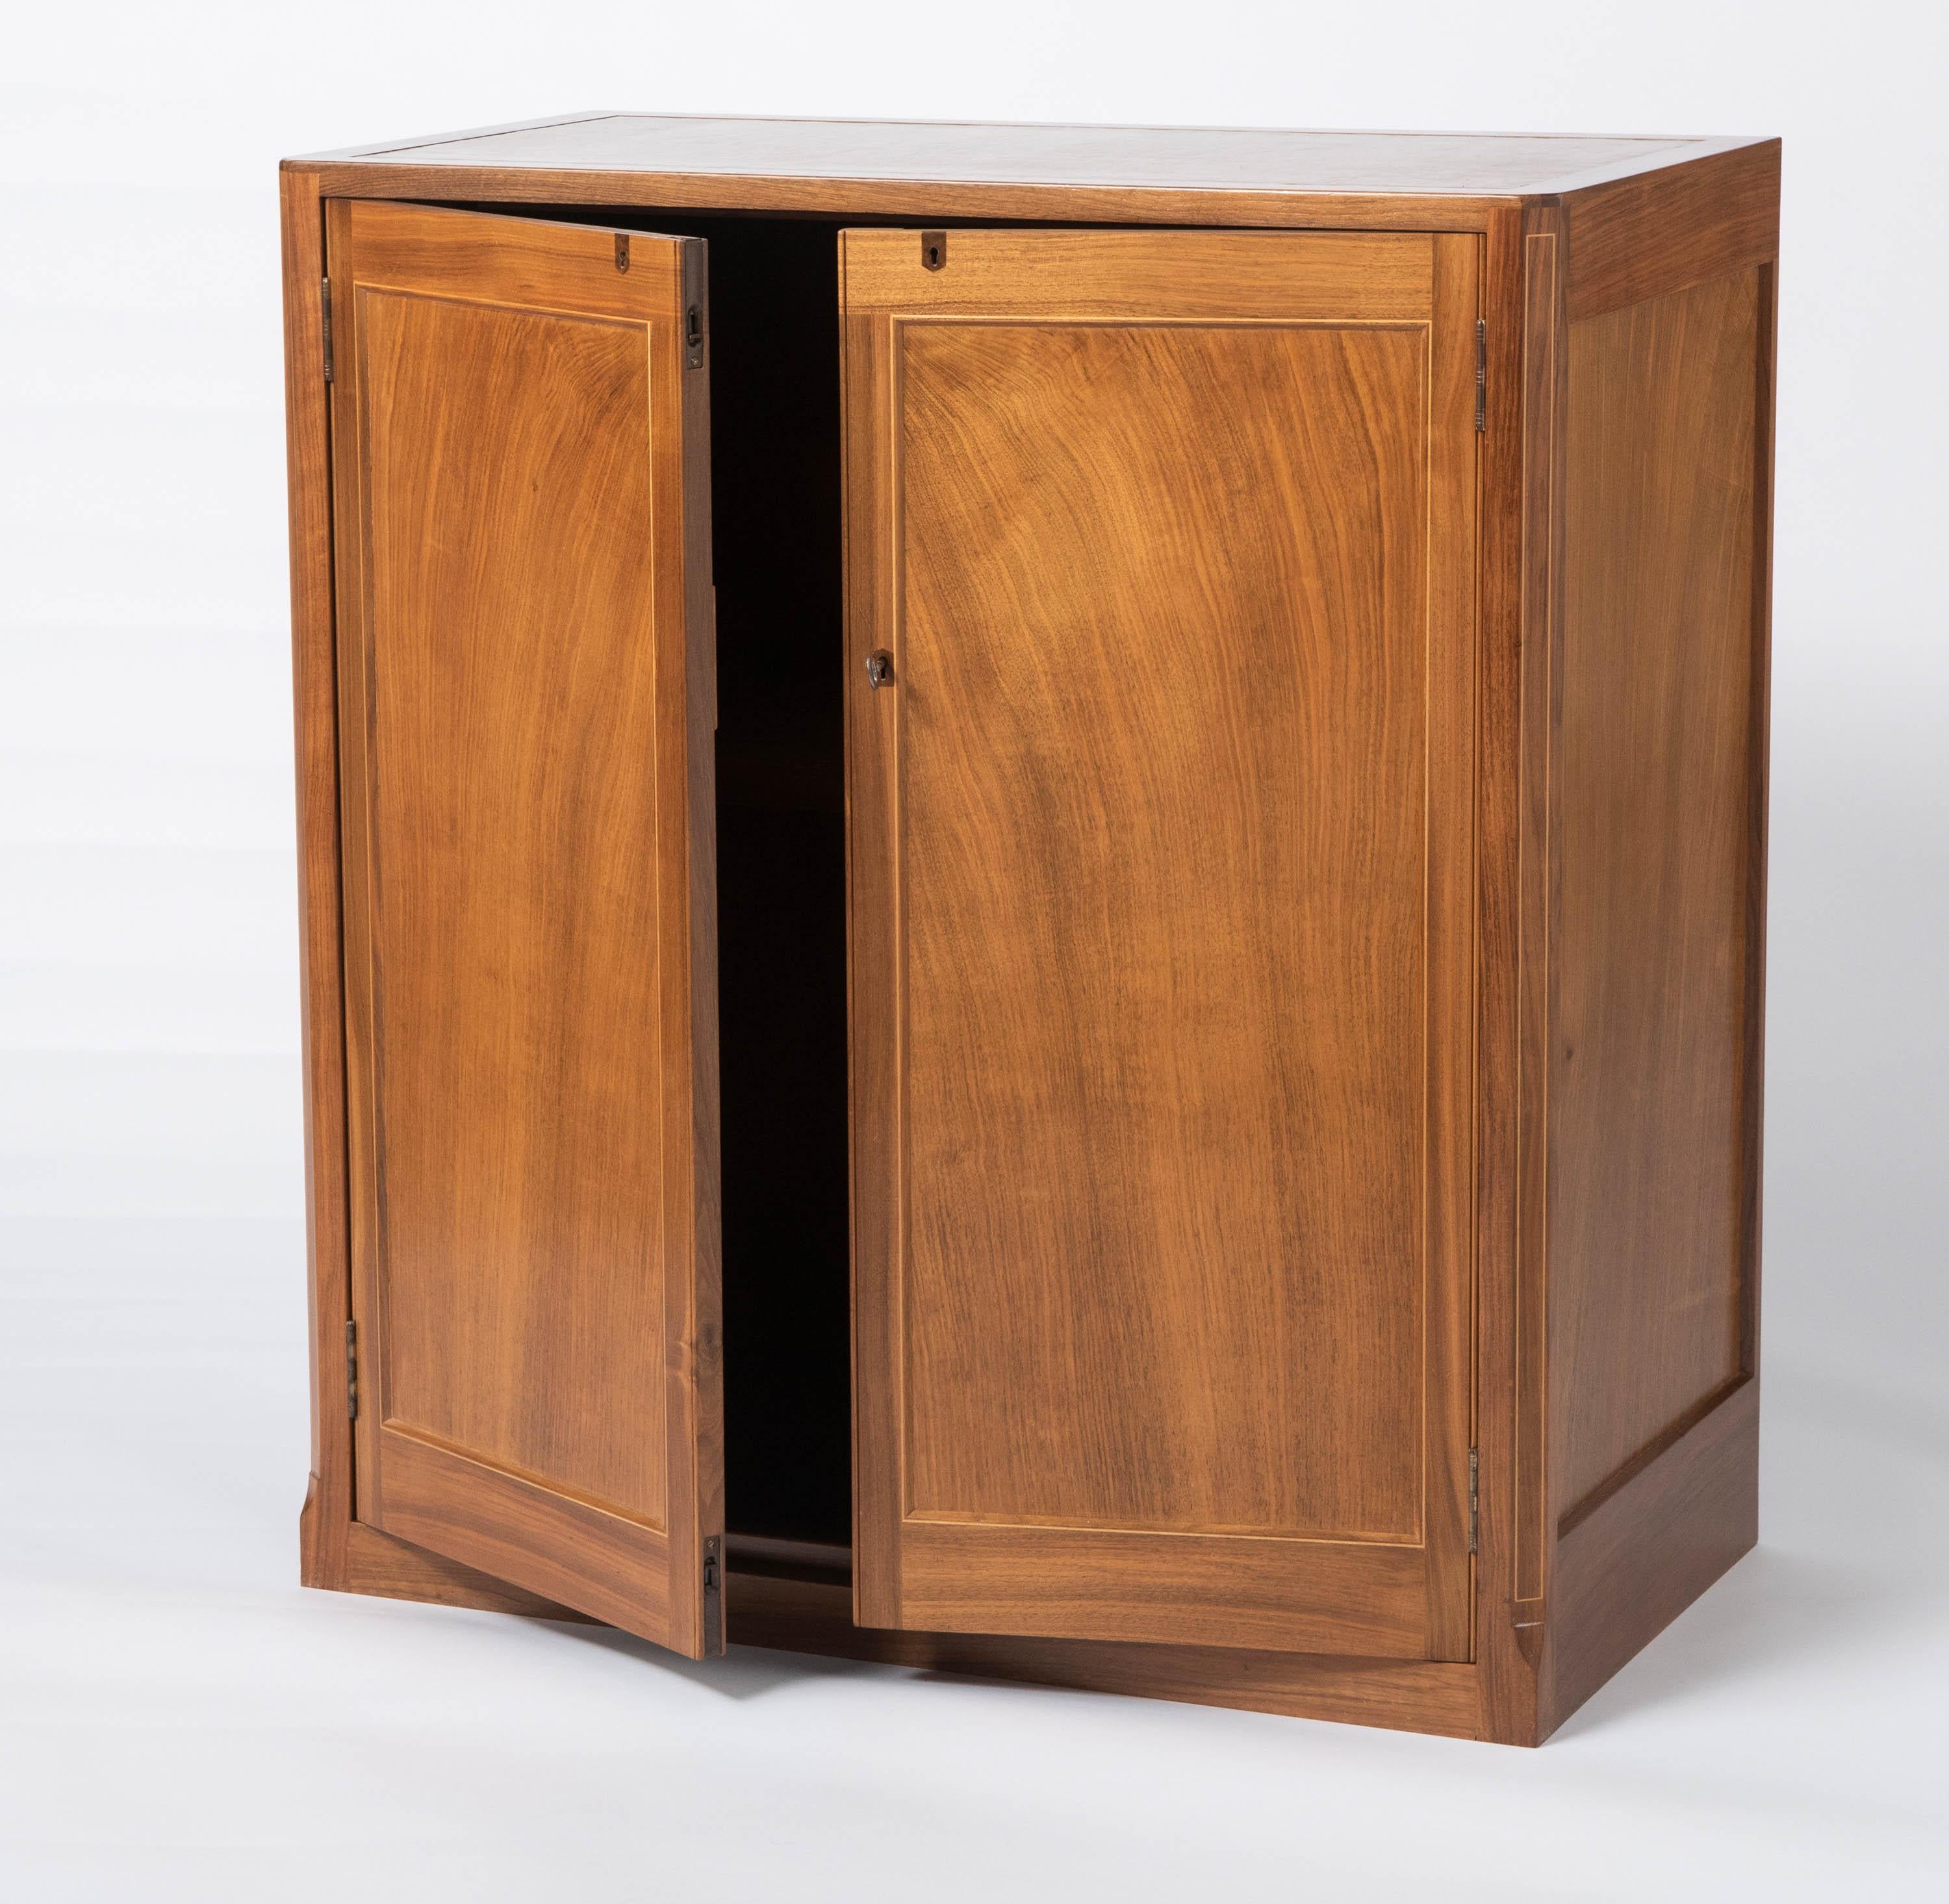 A filling cabinet by Edward Barnsley.
English walnut with sycamore stringing and ebony inlay.
Chamfered edges.
English, circa 1969
Measures: 84 cm W x 46 cm D x 93 cm H
Provenance; Lord Emanuel Kaye, Lansing Bagnall.
 